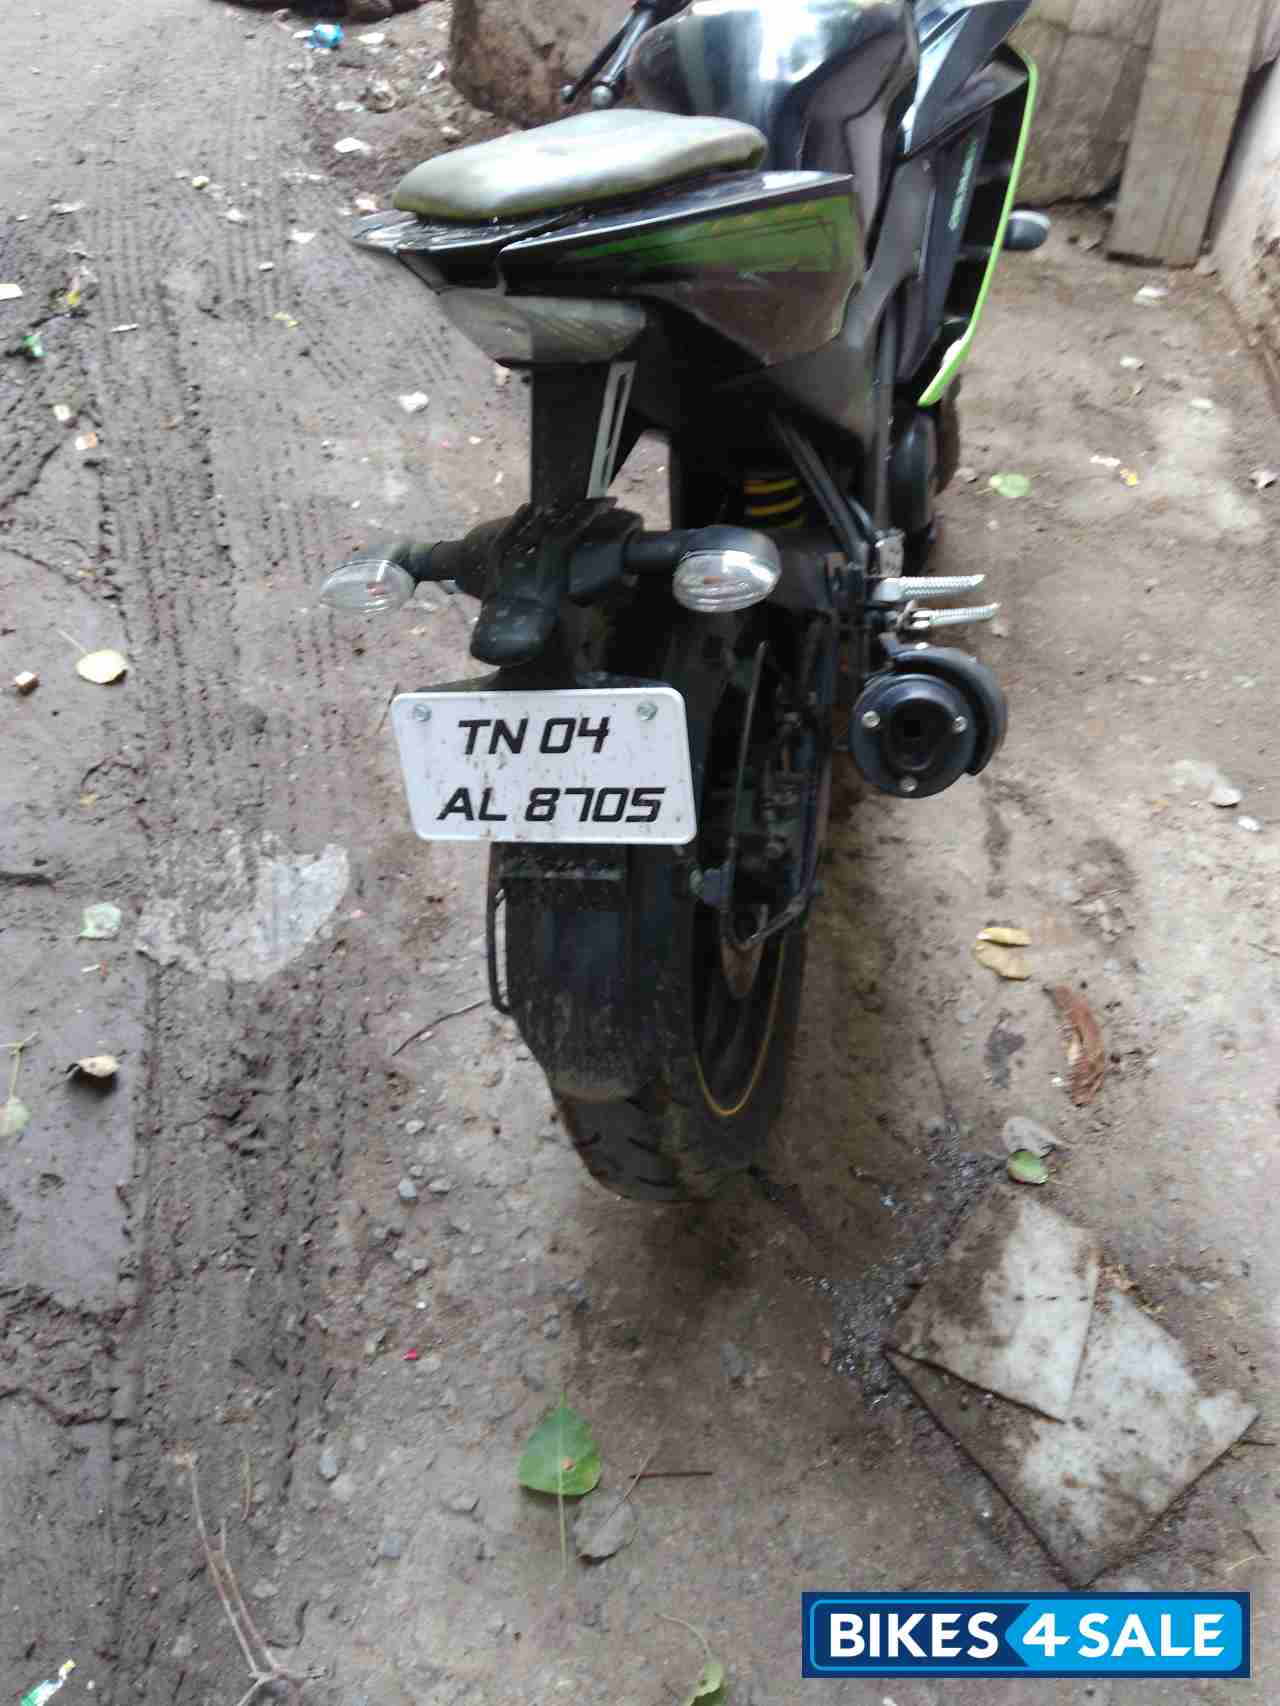 Used 2013 model Yamaha YZF R15 for sale in Chennai. ID 158409 